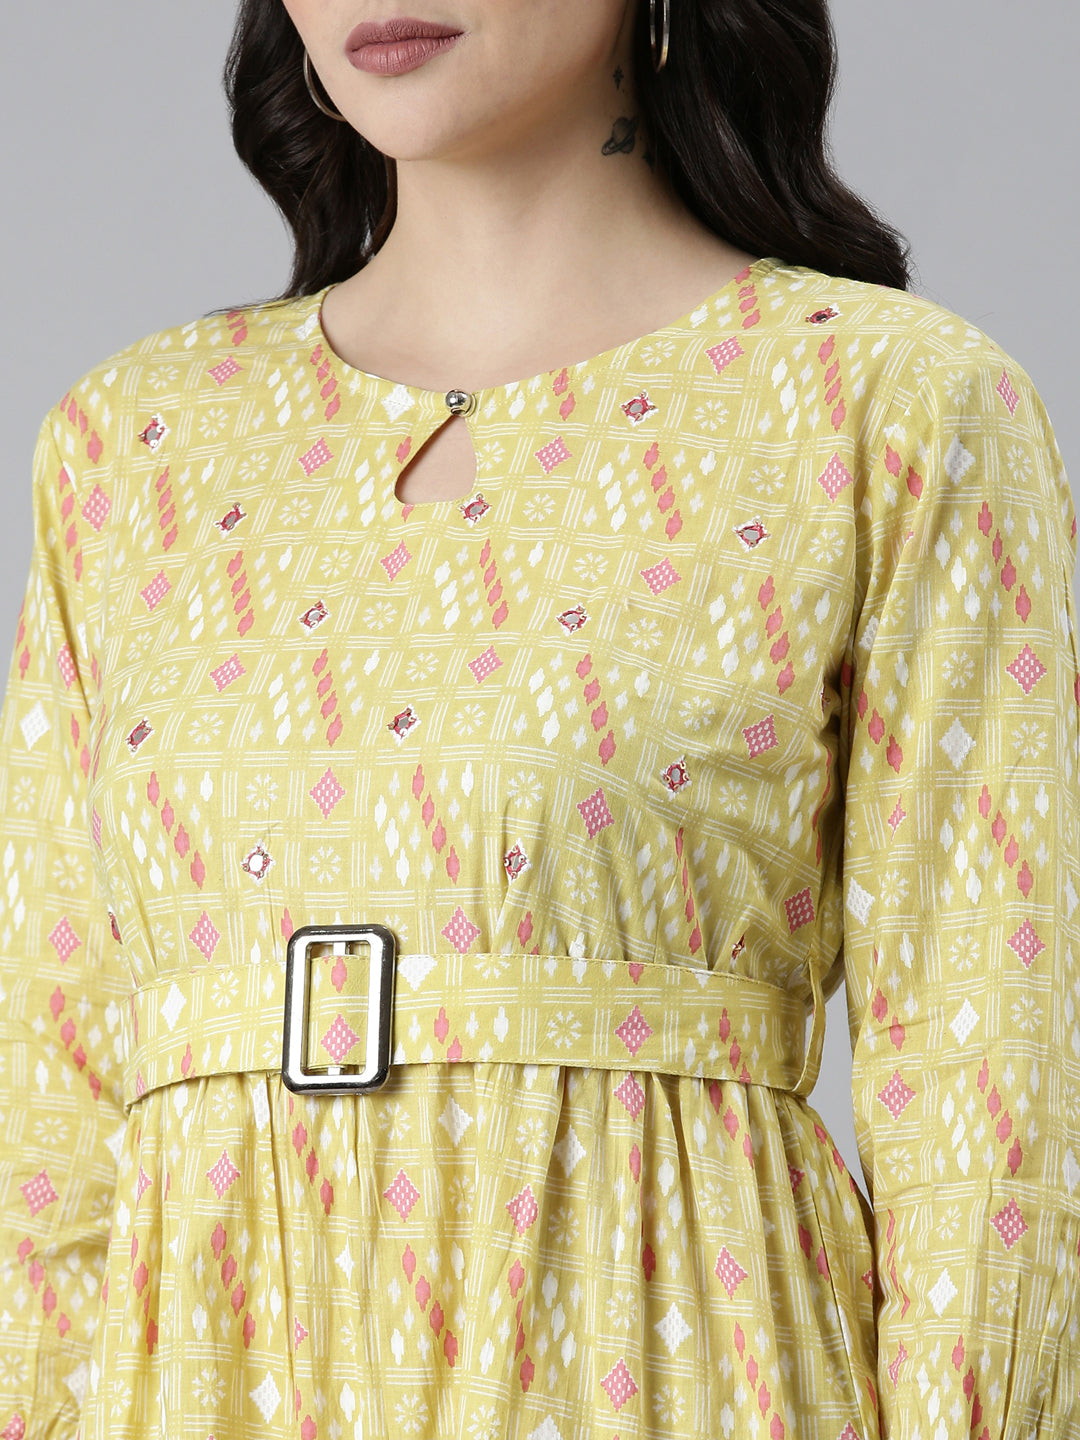 Women Yellow Geometrical Fit and Flare Dress